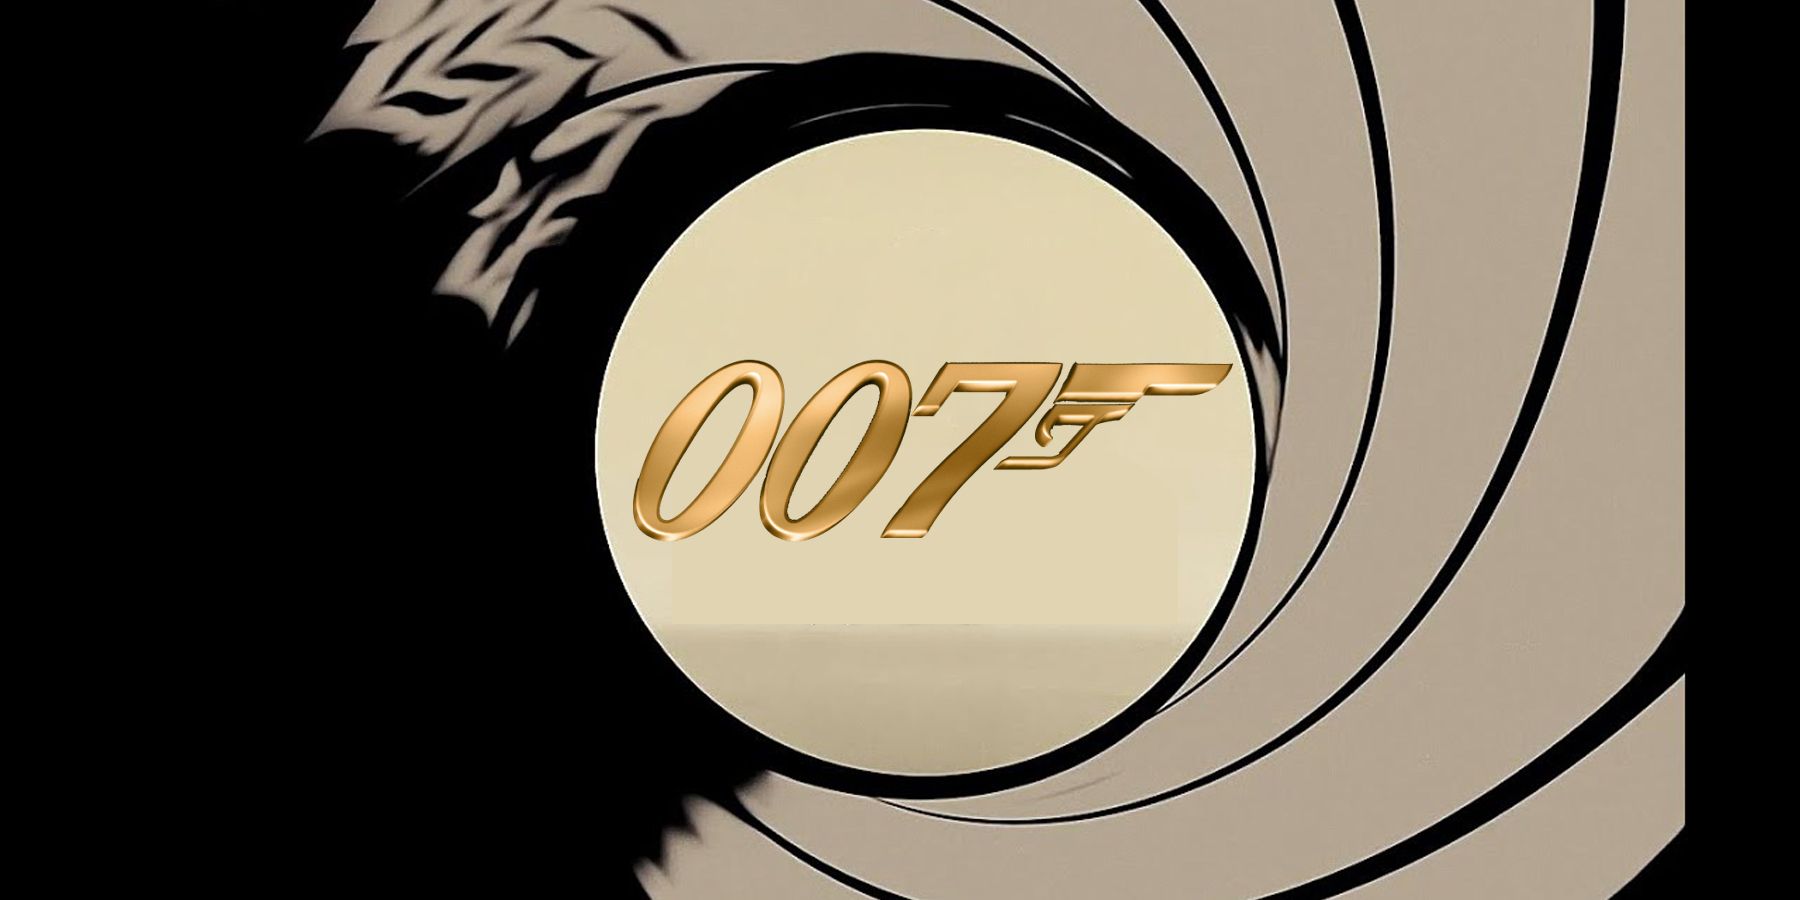 James Bond Casting Director Says Younger Actors Lacked Mental Capacity